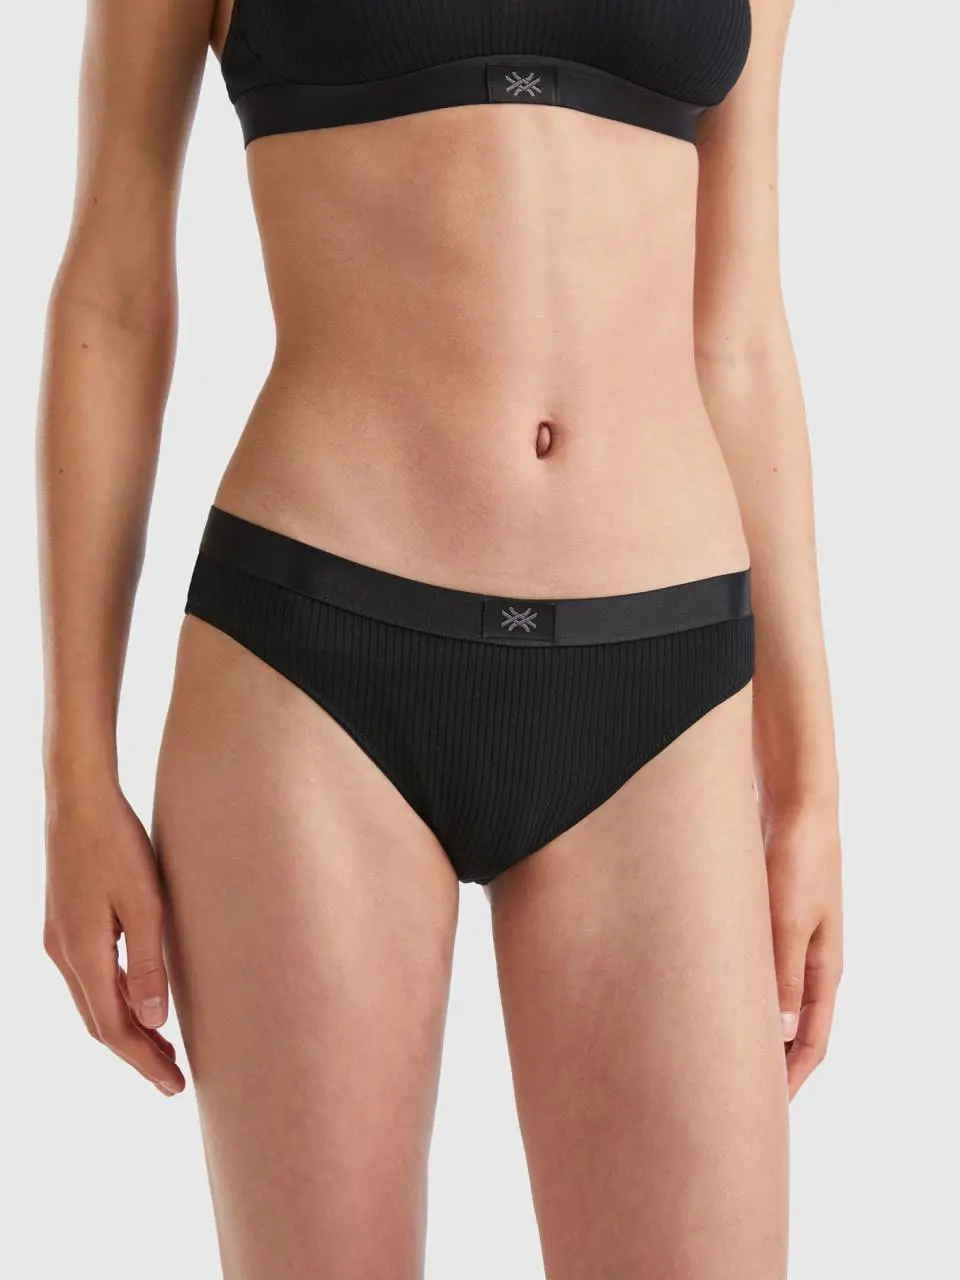 Benetton ribbed low-rise briefs. 1